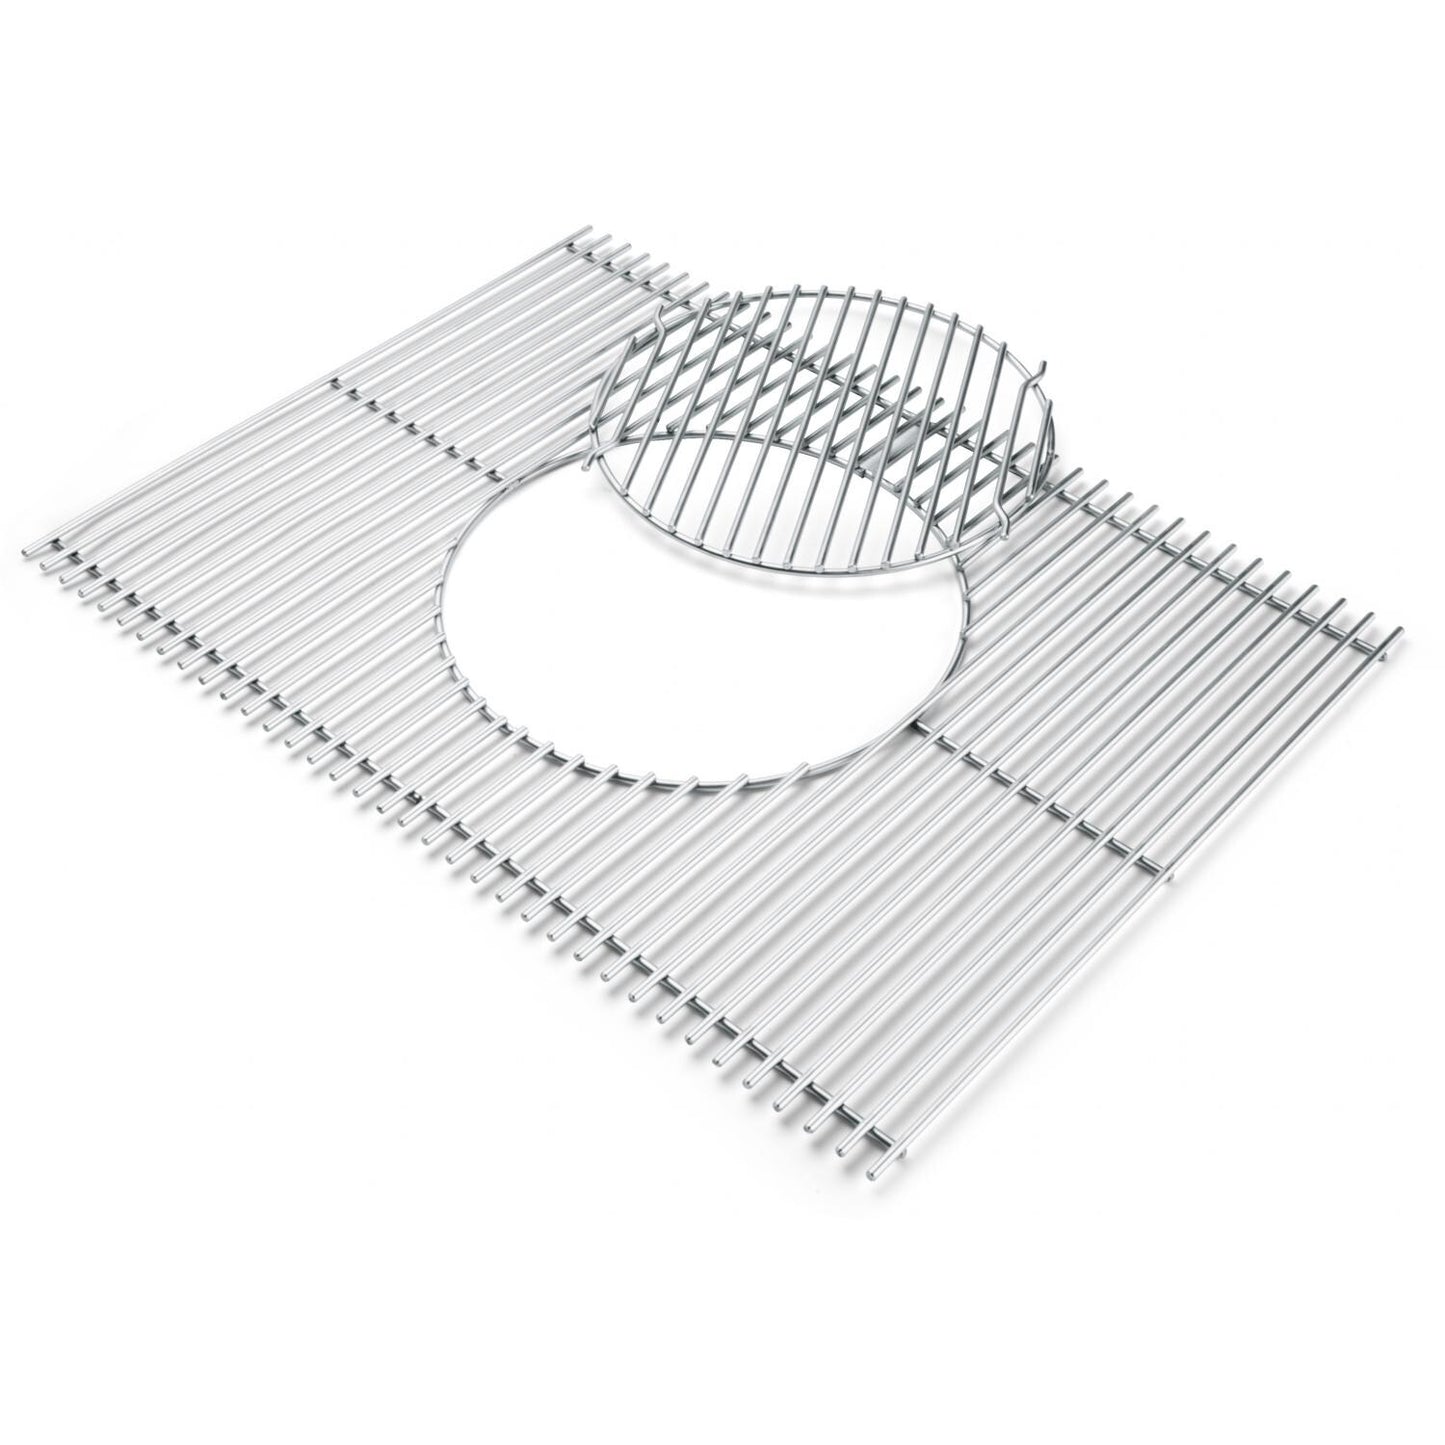 Weber Stainless Steel Cooking Grate For Genesis 300 Weber Indigo Pool Patio BBQ